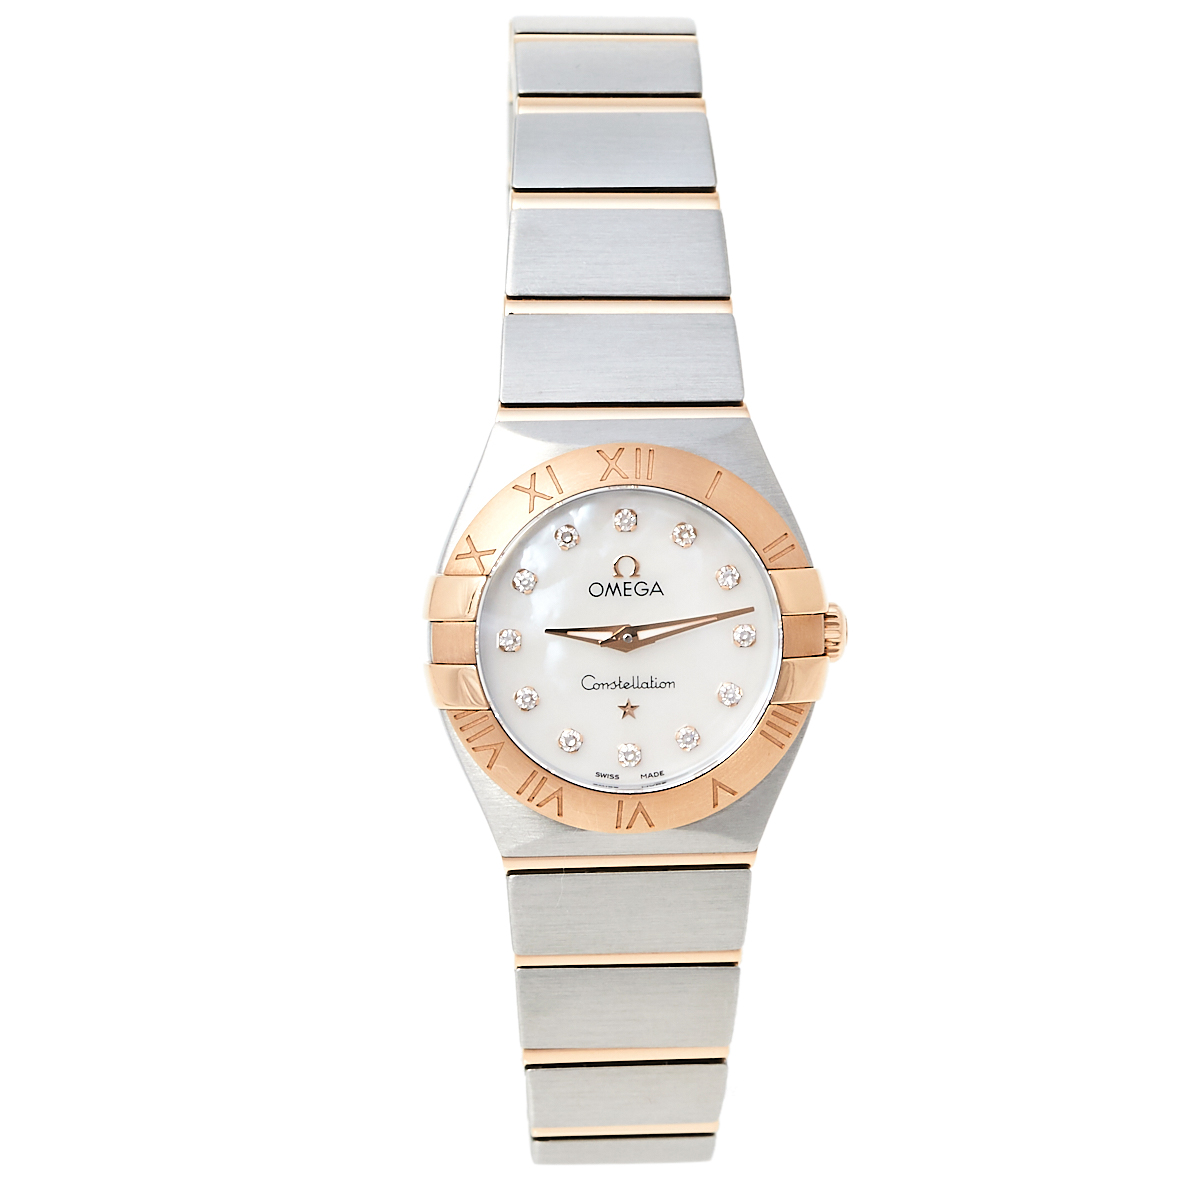 Omega Mother of Pearl 18K Rose Gold & Stainless Steel Diamond Constellation 123.20.24.60.55.001 Women's Wristwatch 24 mm